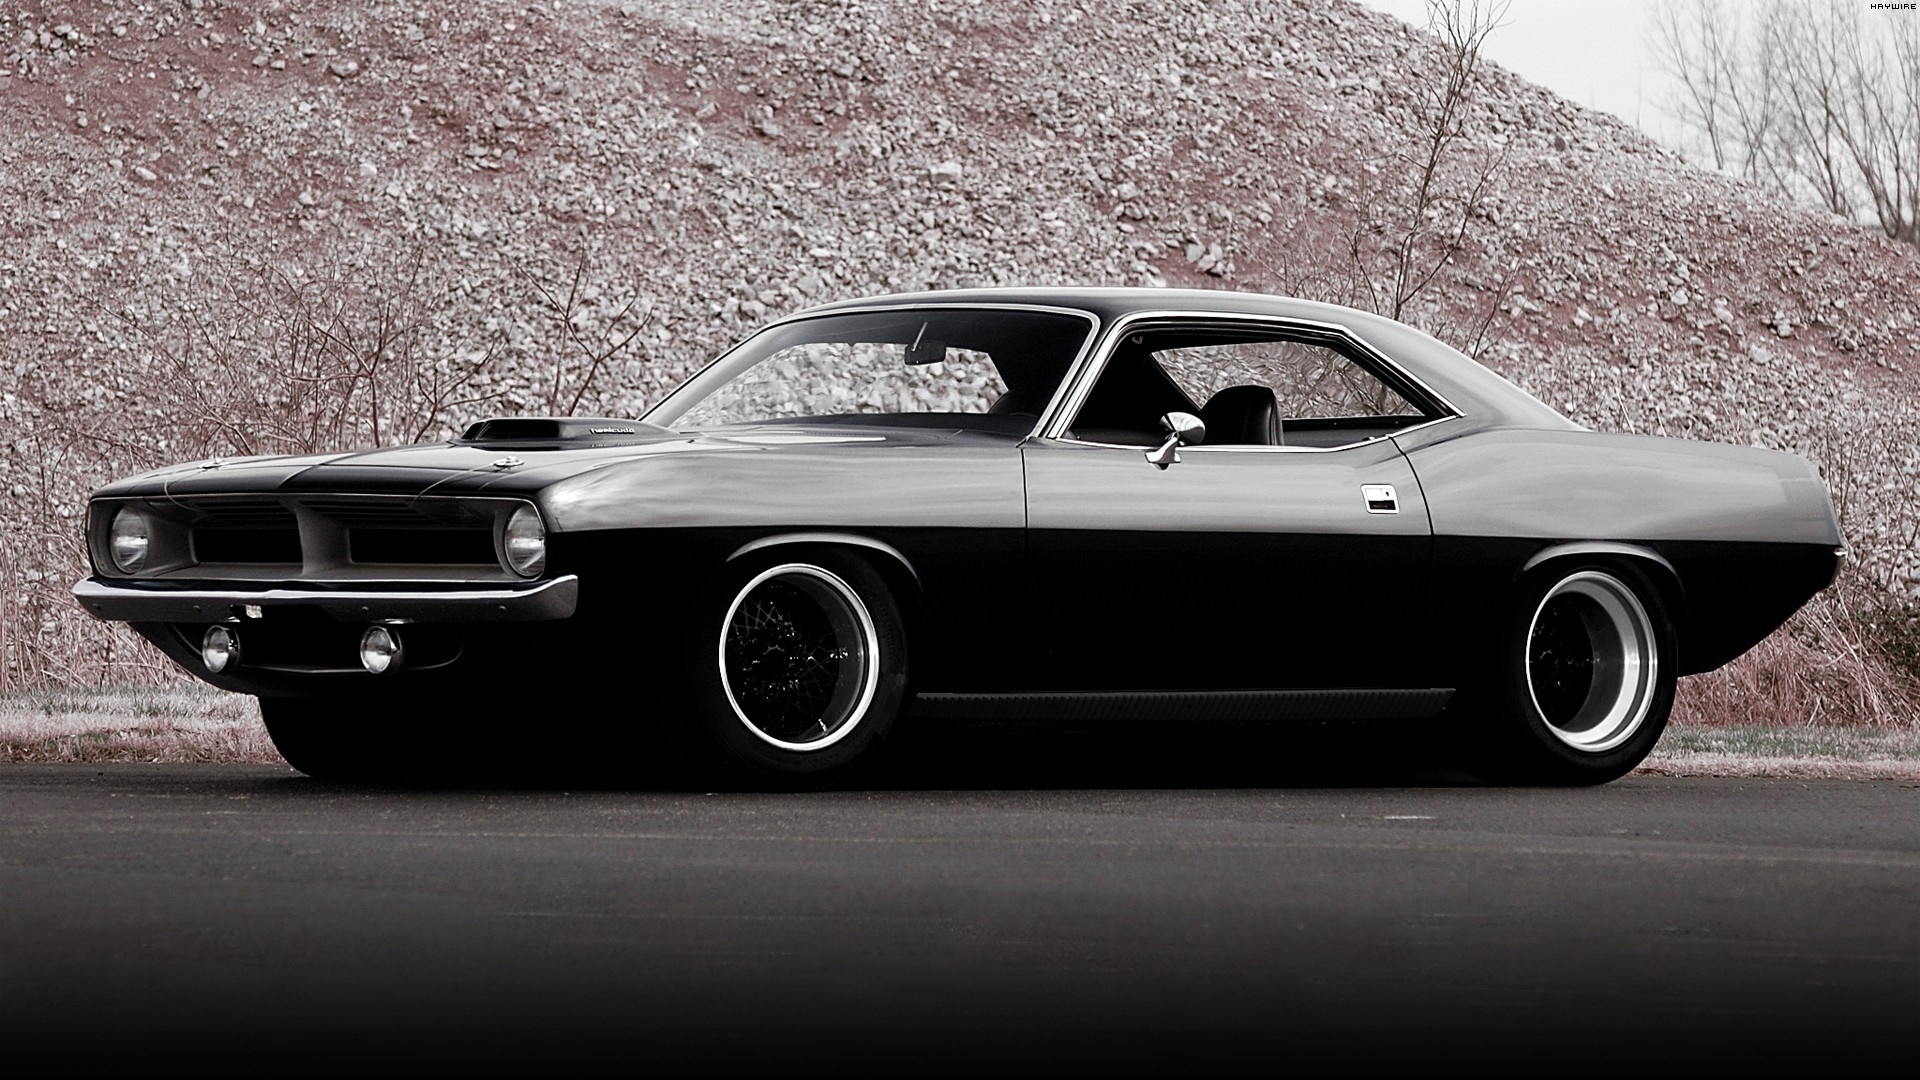 Muscle Hot Rod Retro Classic Black Wheels Stance Wallpaper Background